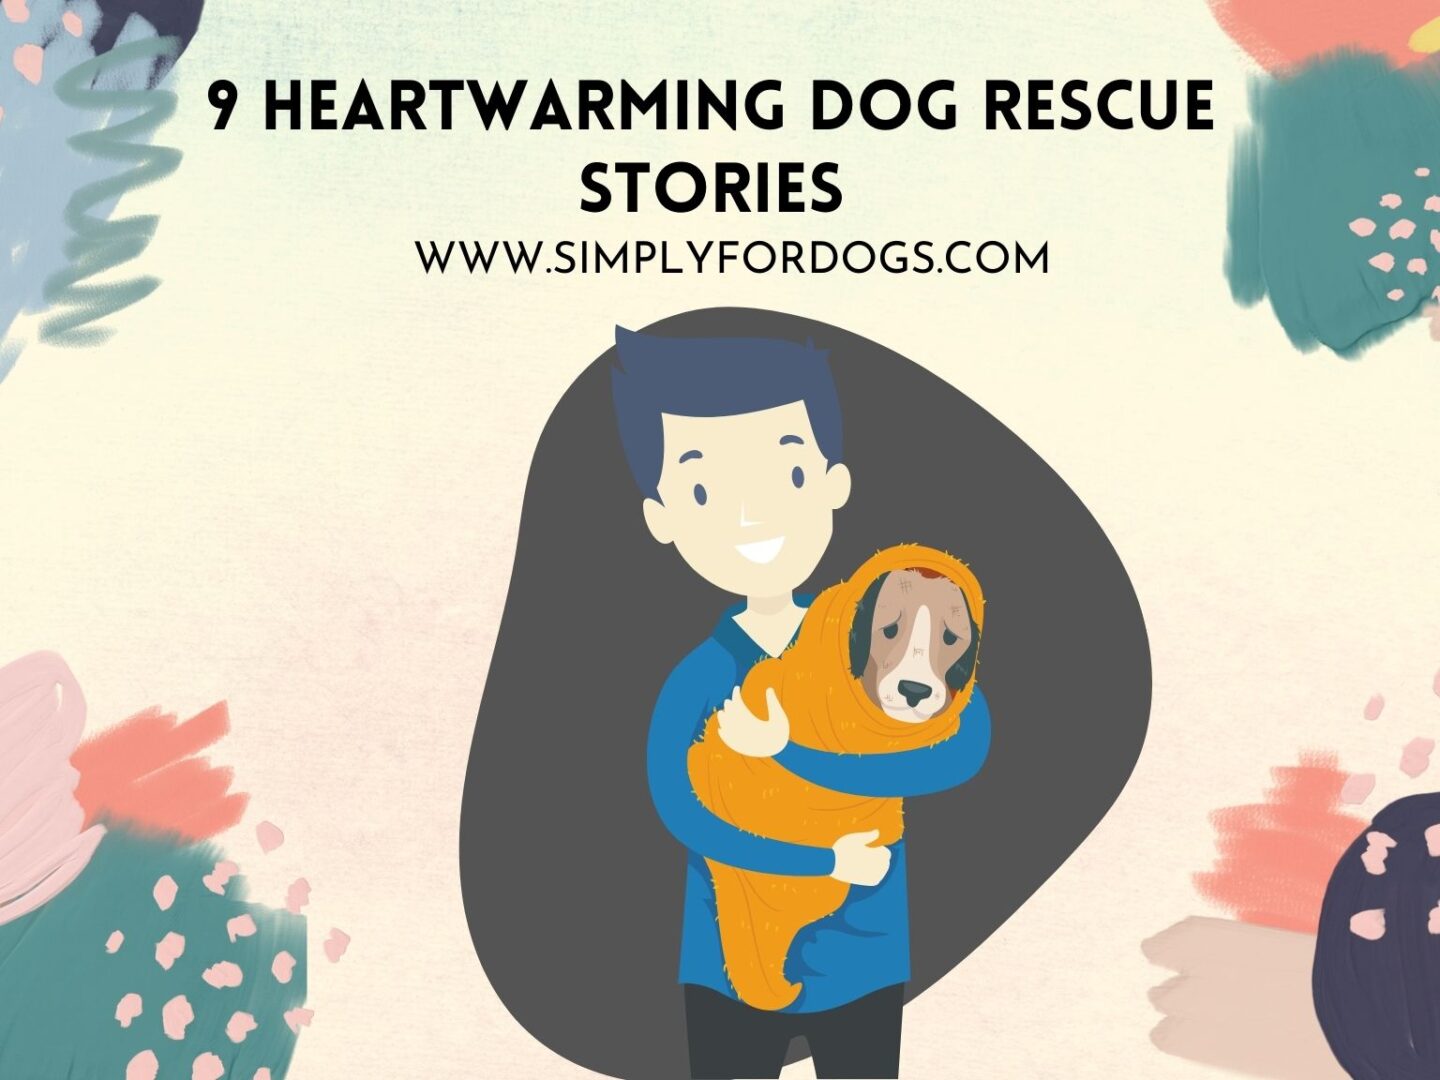 9-heartwarming-dog-rescue-stories-inspirational-simply-for-dogs